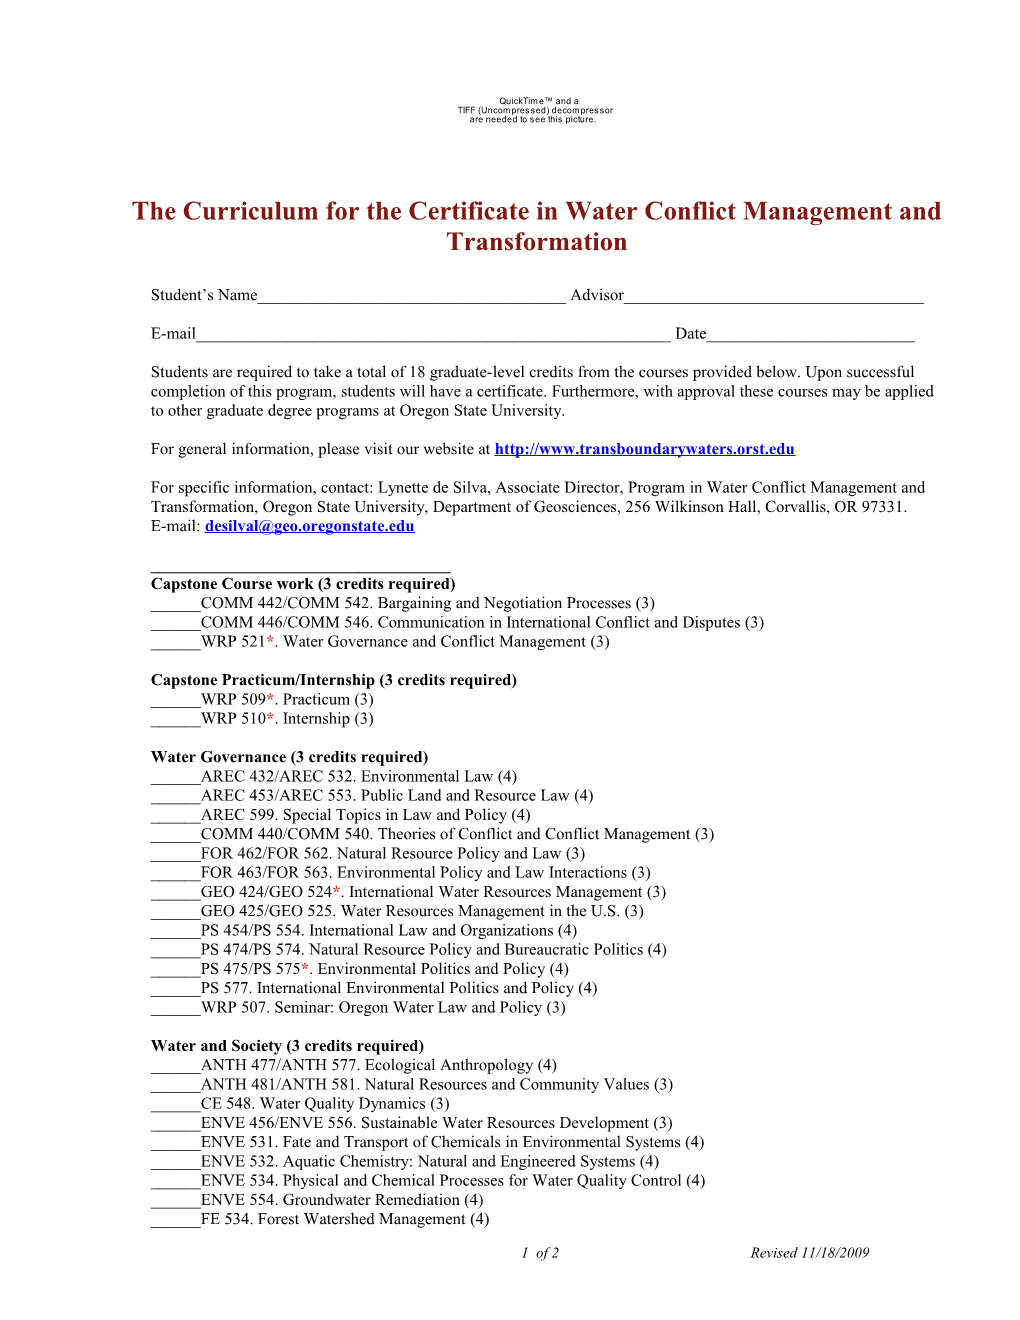 The Curriculum for the Certificate in Water Conflict Management and Transformation